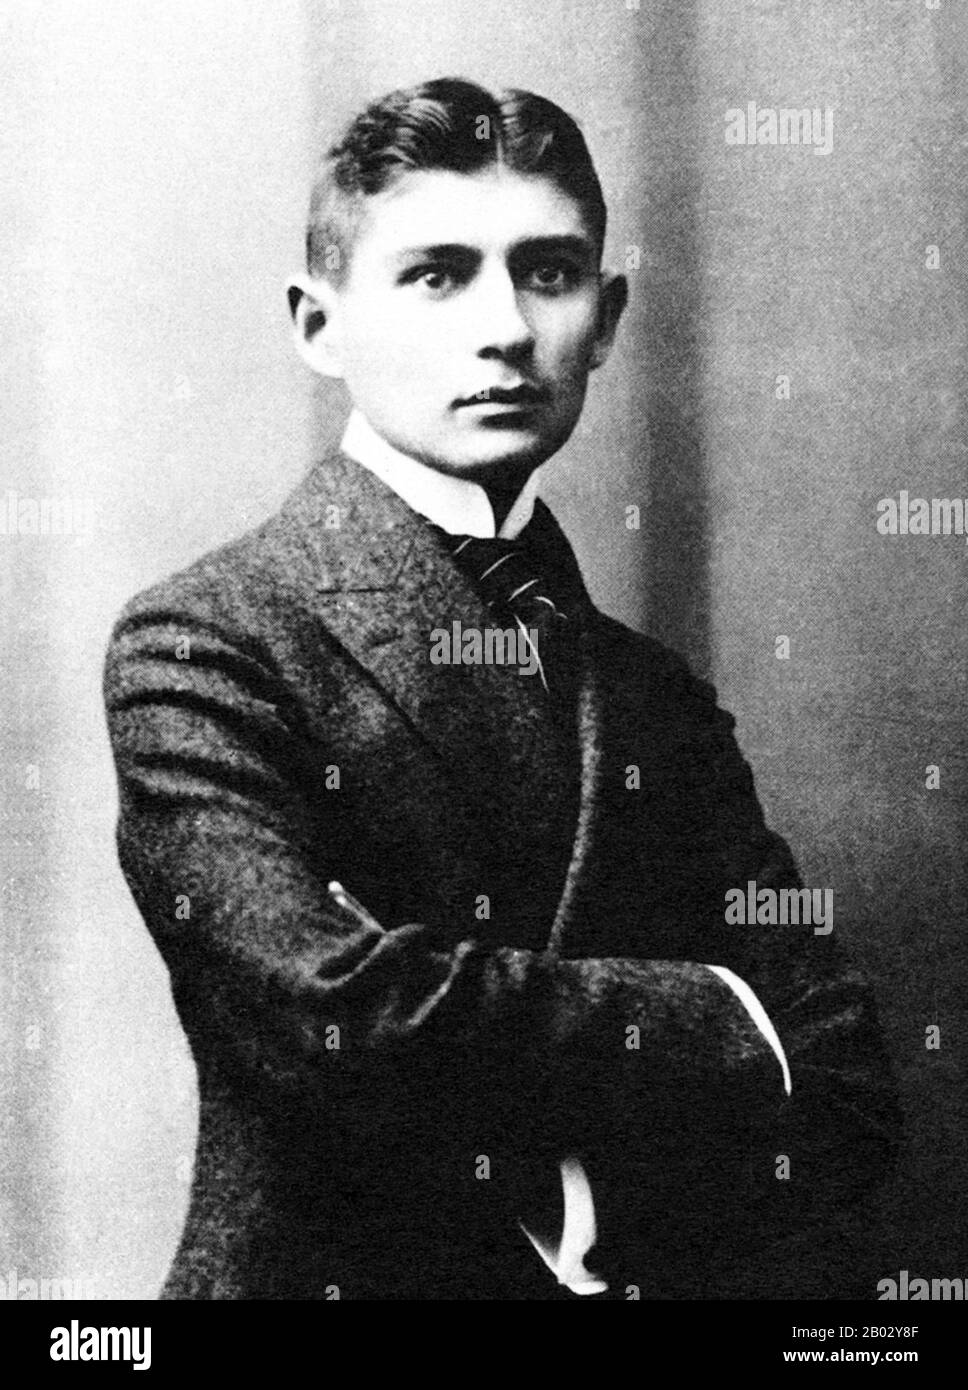 Franz Kafka (3 July 1883 – 3 June 1924) was a German-language writer of novels and short stories, regarded by critics as one of the most influential authors of the 20th century. Most of his works, such as Die Verwandlung (The Metamorphosis), Der Process (The Trial), and Das Schloss (The Castle), are filled with the themes and archetypes of alienation, physical and psychological brutality, parent–child conflict, characters on a terrifying quest, labyrinths of bureaucracy, and mystical transformations.  Kafka was born into a middle-class, German-speaking Jewish family in Prague, the capital of t Stock Photo